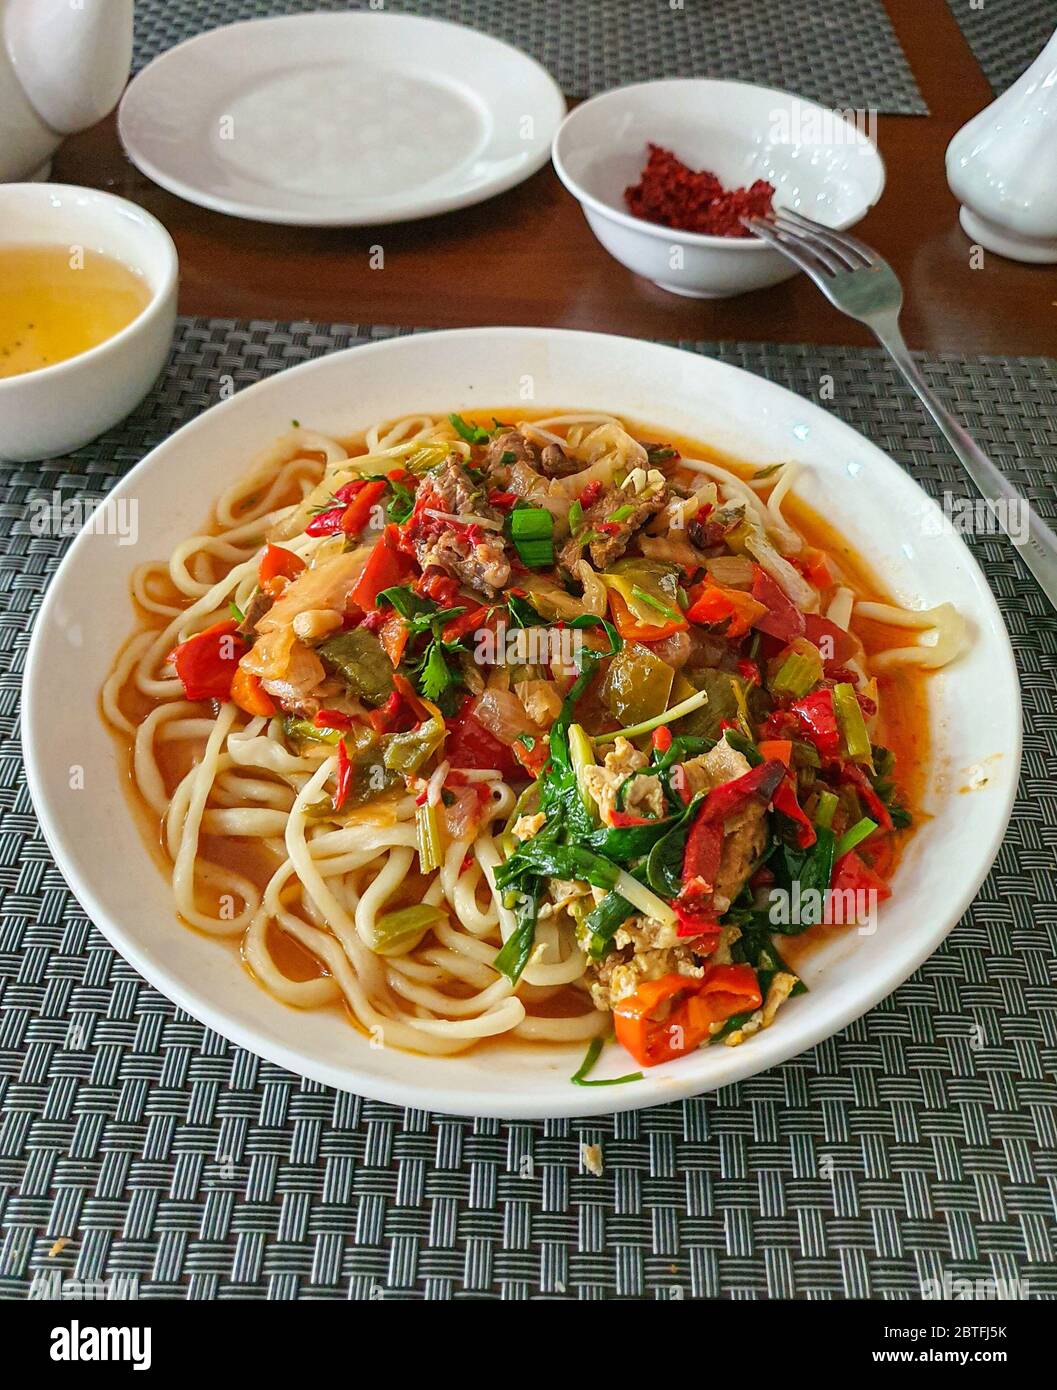 Uzbek traditional national food lagman, soup with noodles, vegetables and meat, mobile photo Stock Photo